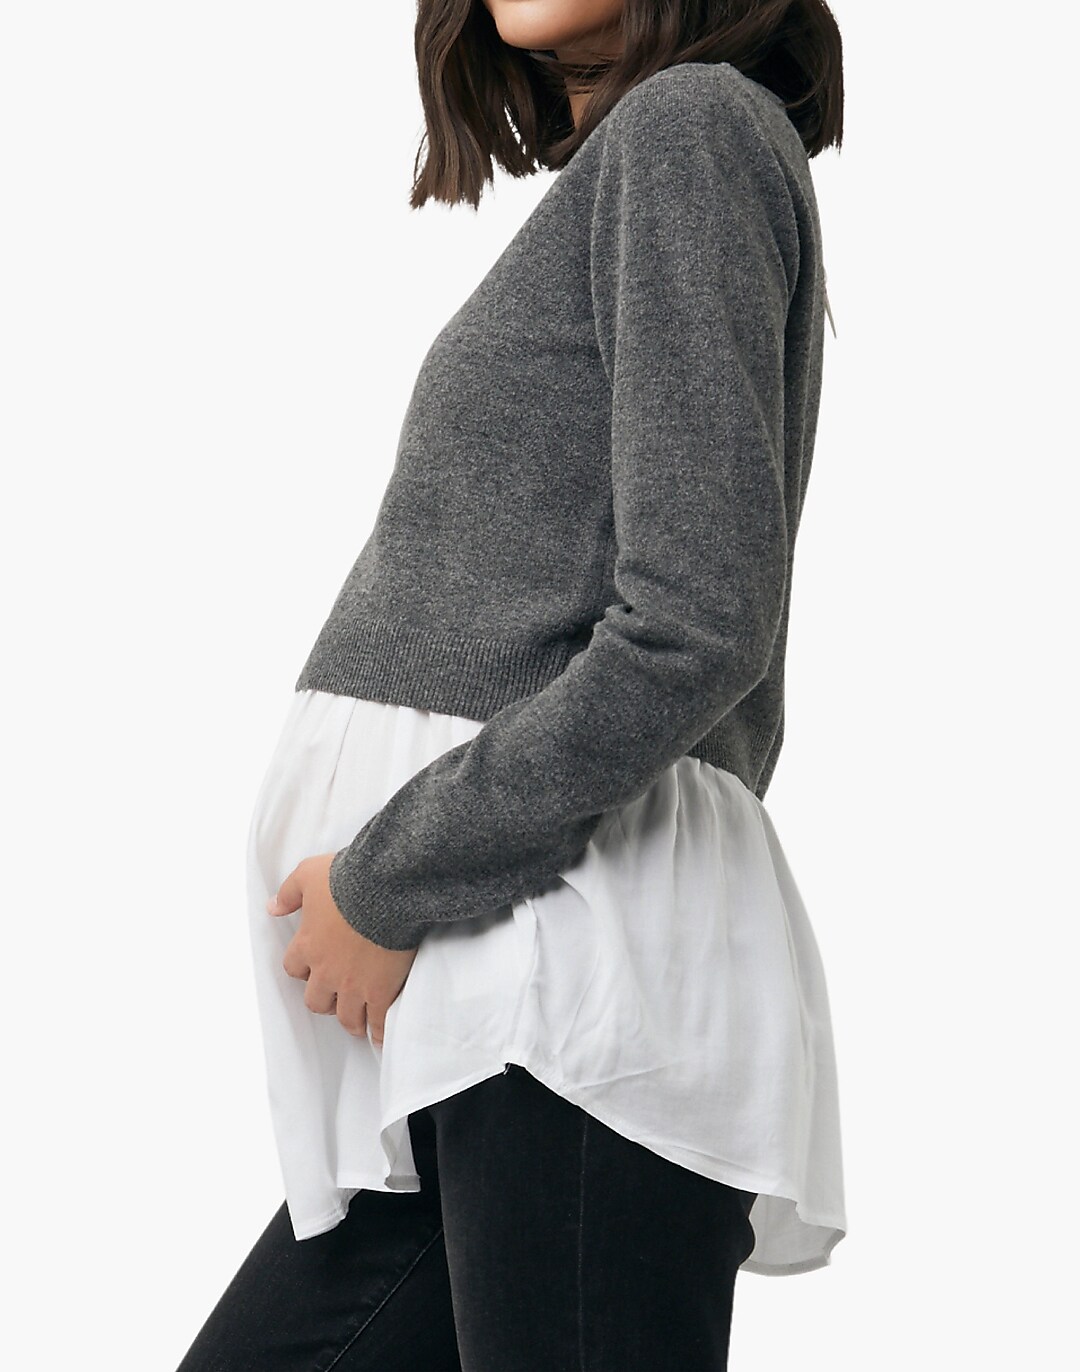 Bonnie Off The Shoulder Maternity Knit Dress by Ripe Maternity